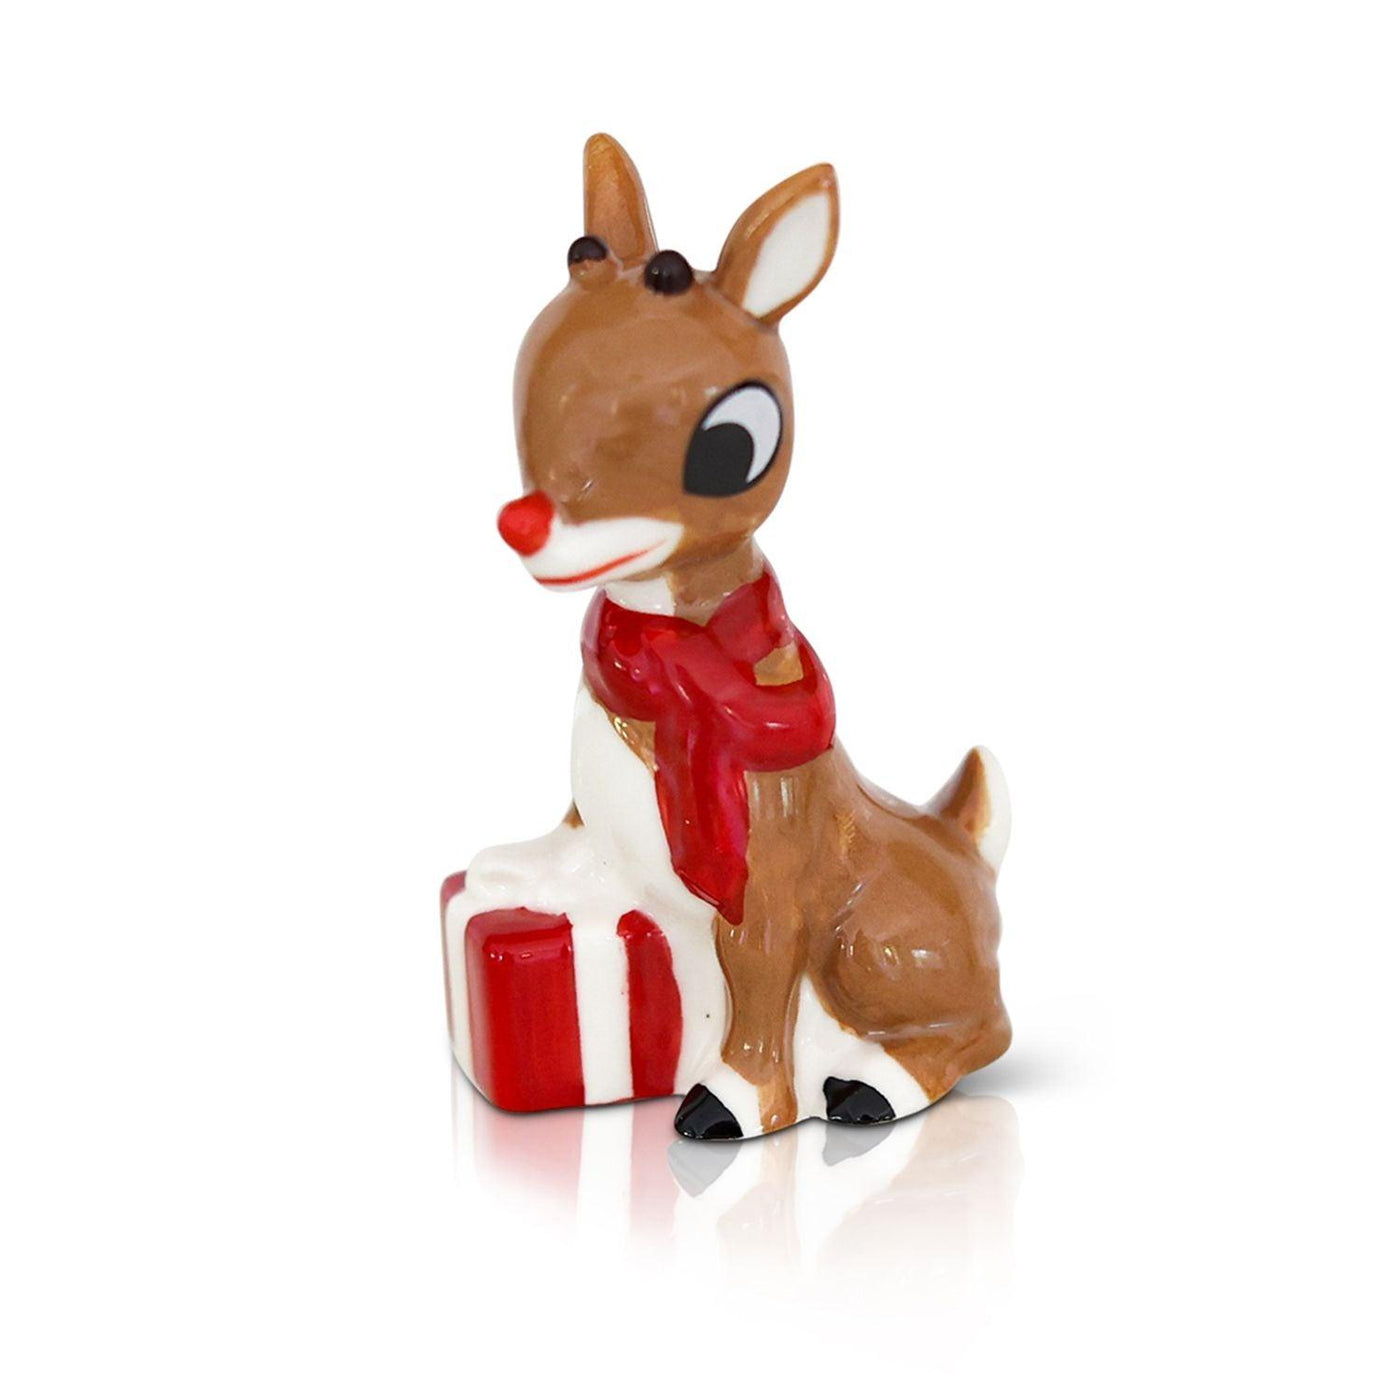 Rudolph the red nosed reindeer mini with a scarf and present